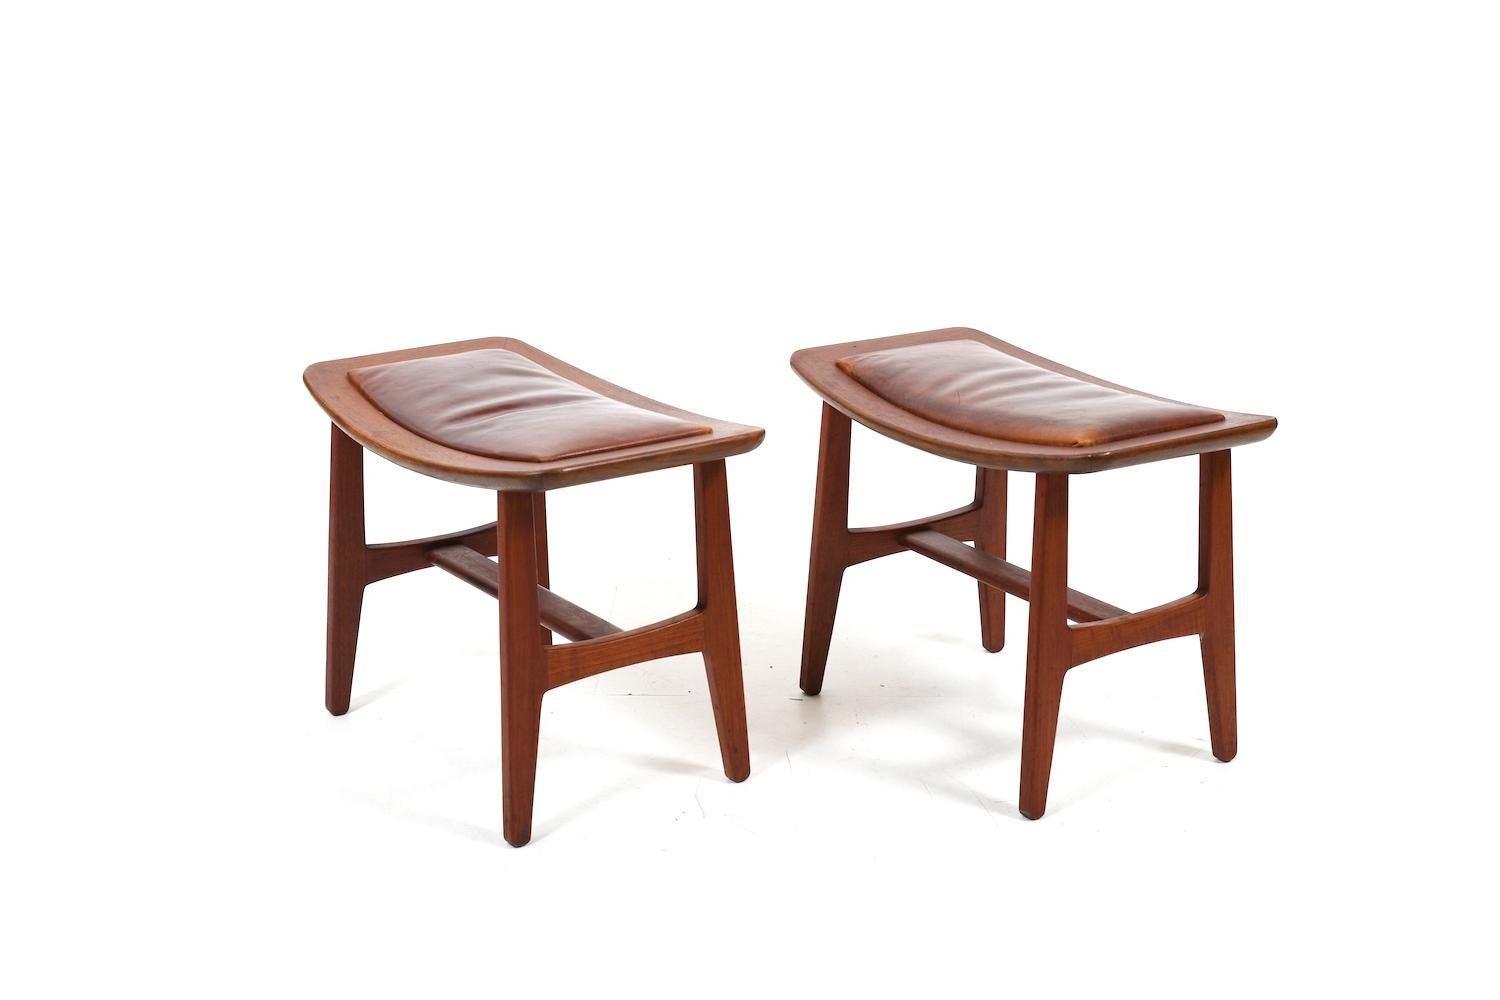 20th Century Pair of Danish Stools in Teak and patinated Leather 1960s